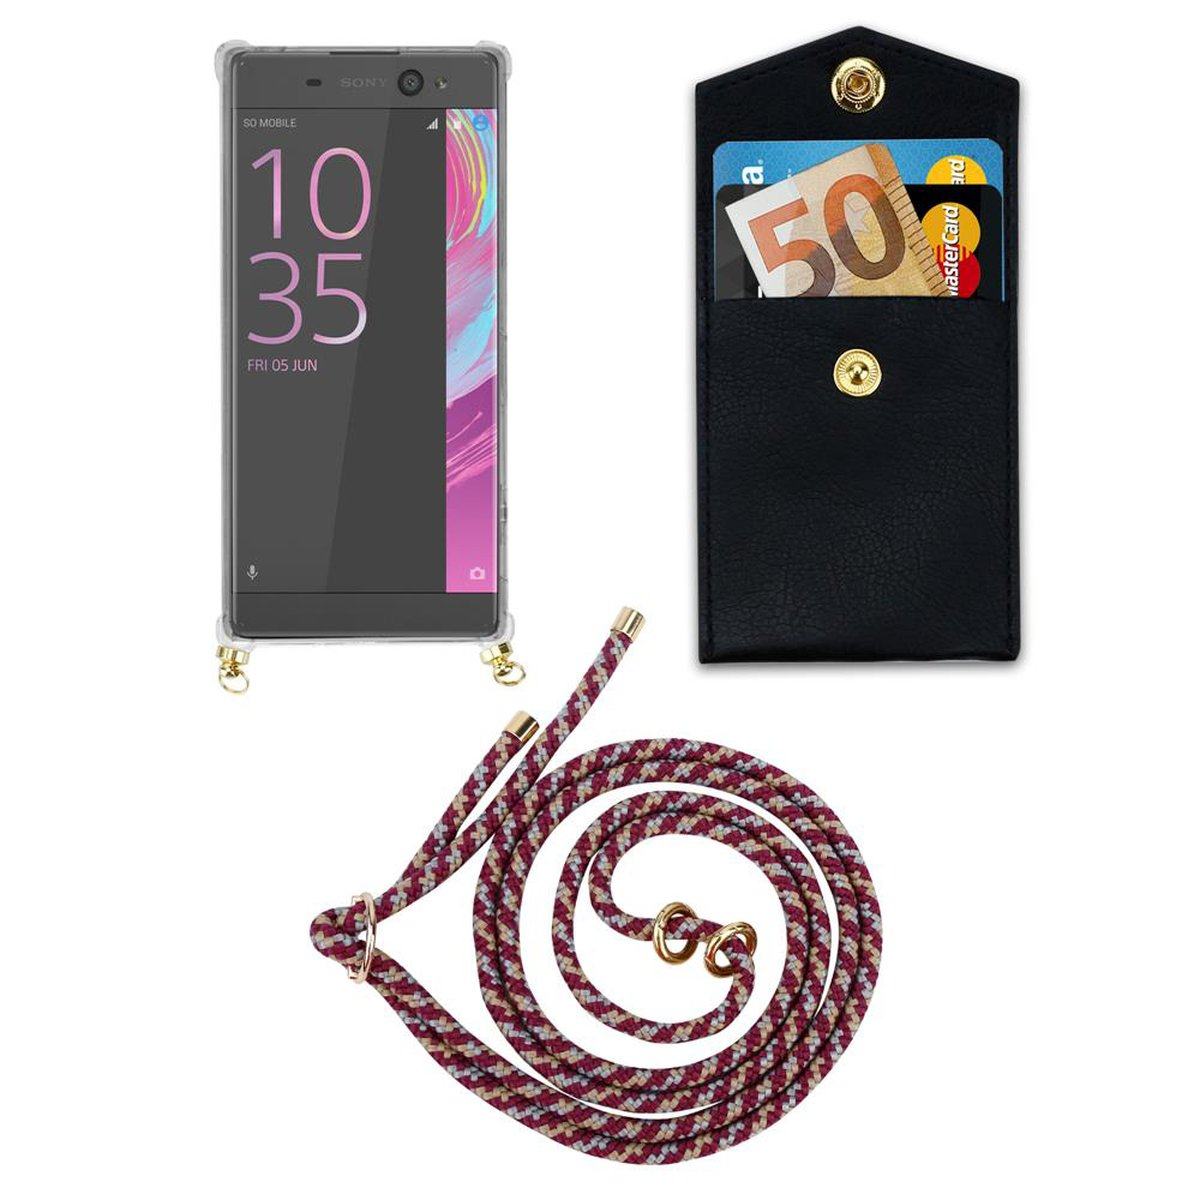 abnehmbarer CADORABO mit Sony, Ringen, Kette Hülle, Xperia Gold Kordel GELB Handy WEIß ROT Band XA, und Backcover,